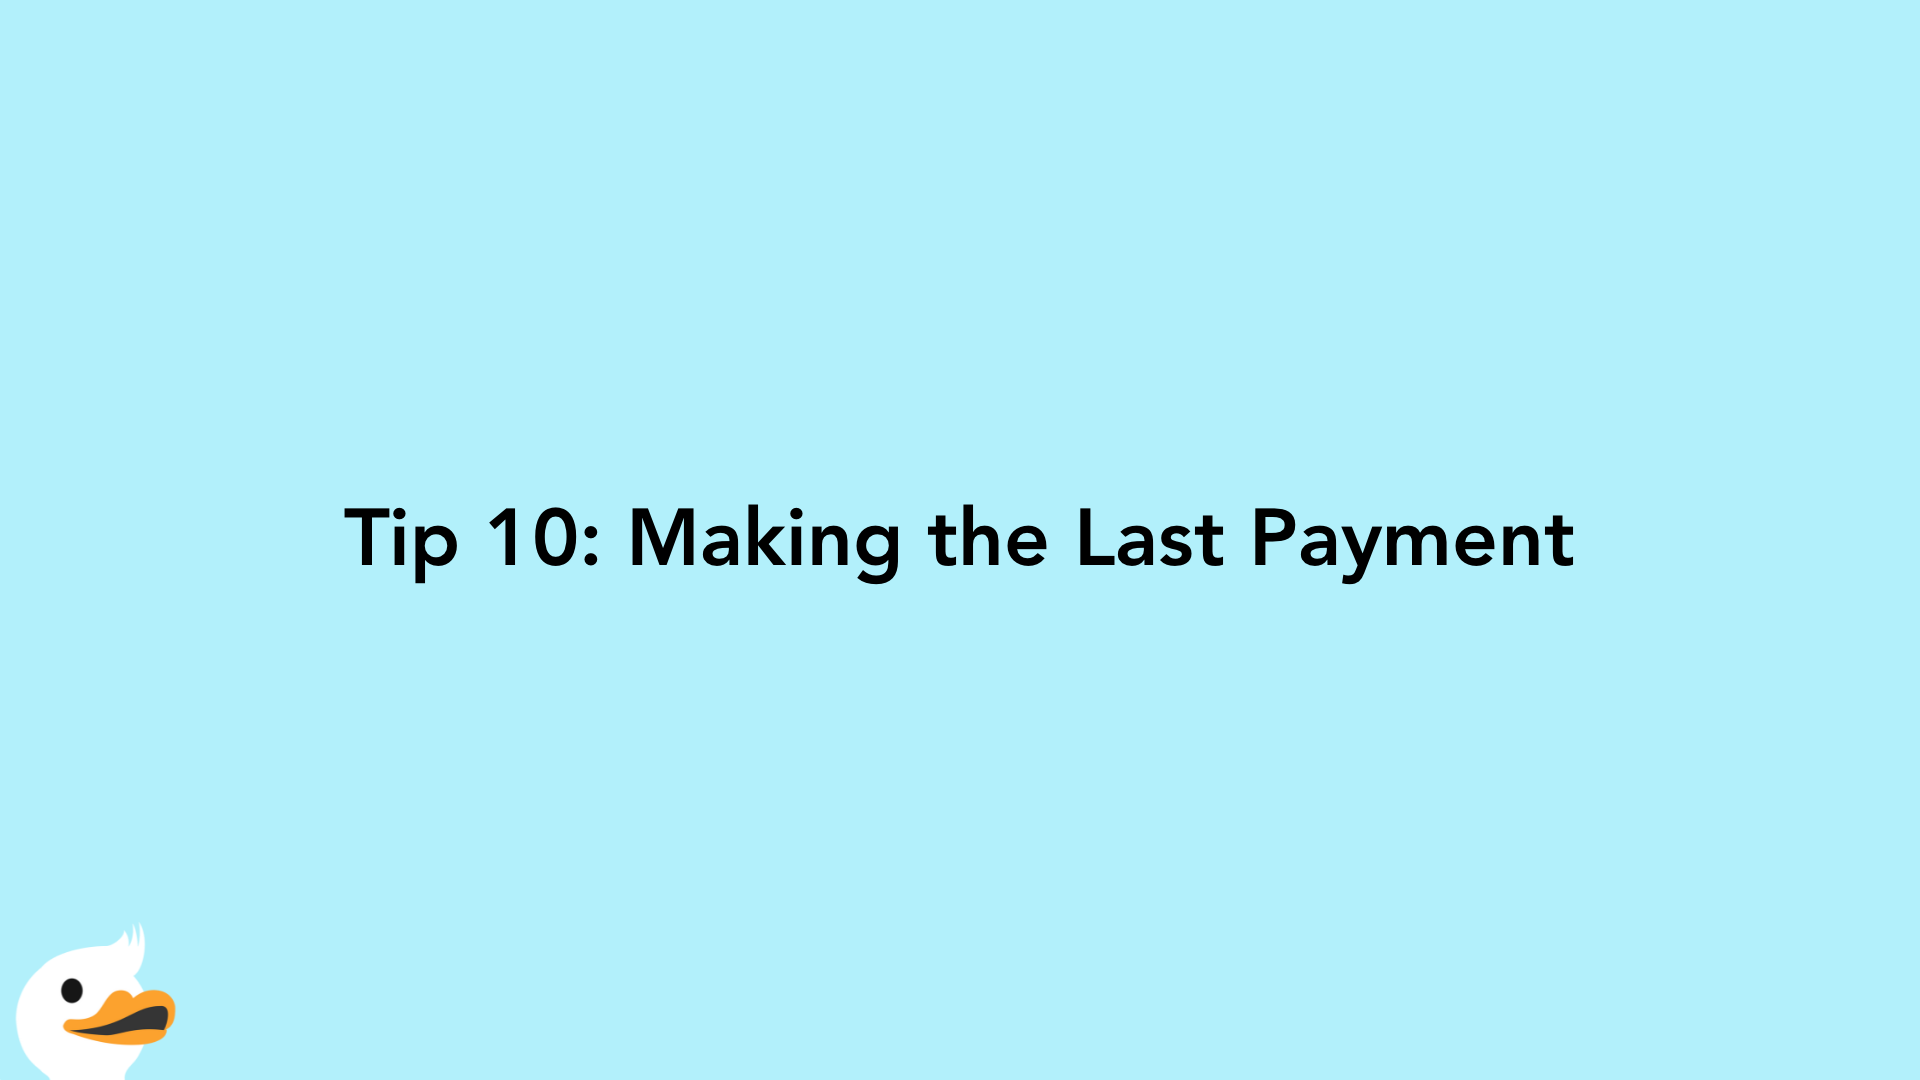 Tip 10: Making the Last Payment